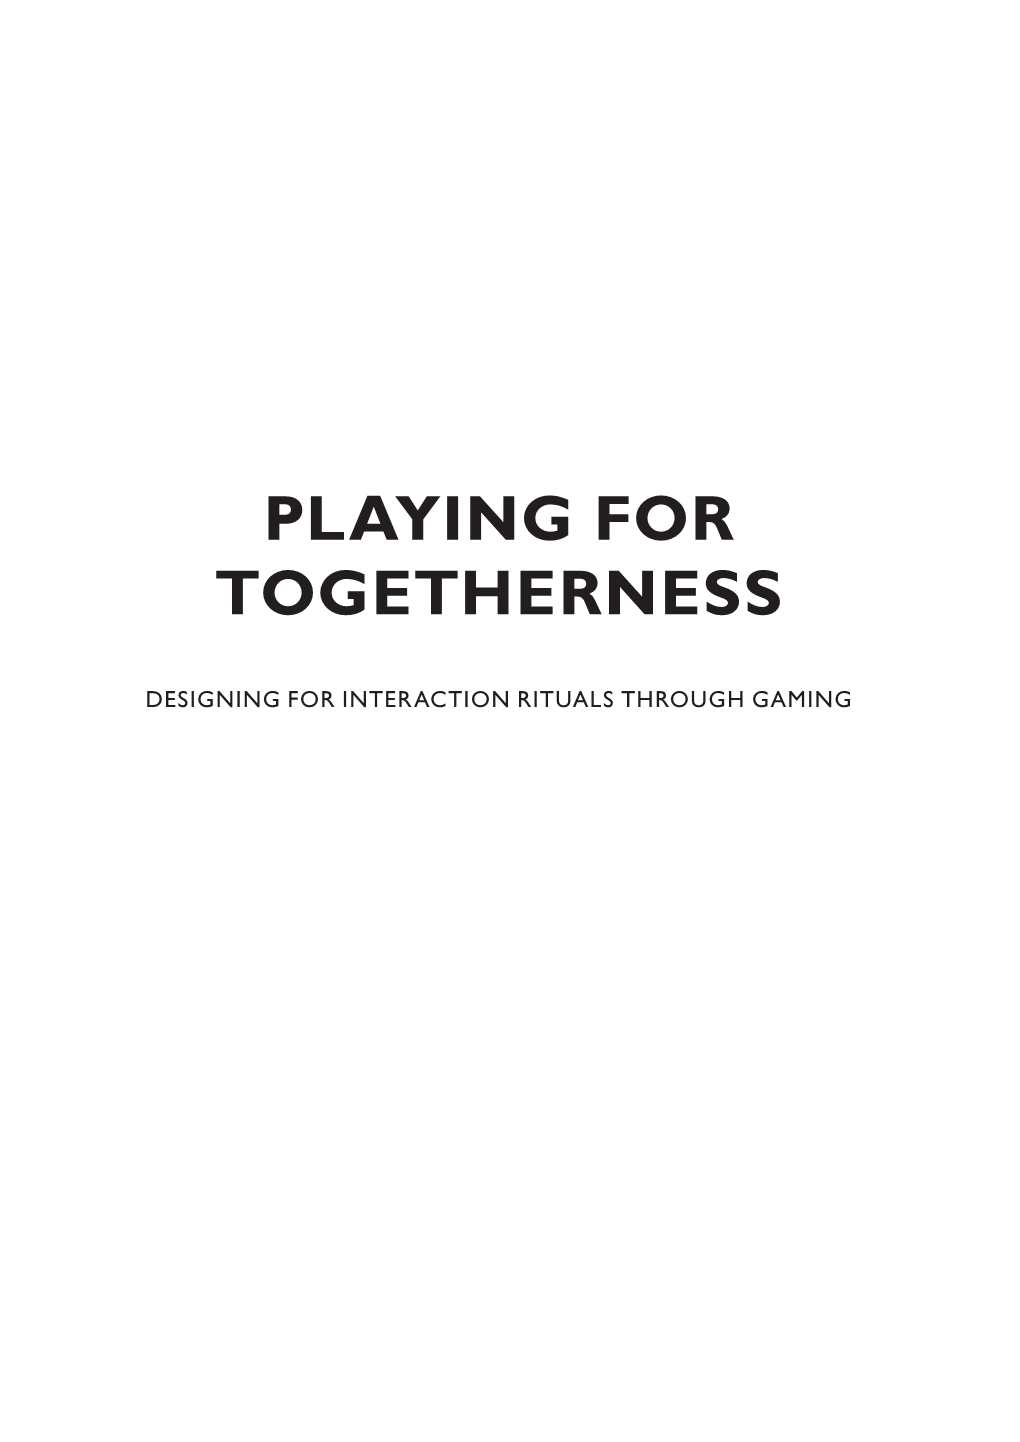 Playing for Togetherness